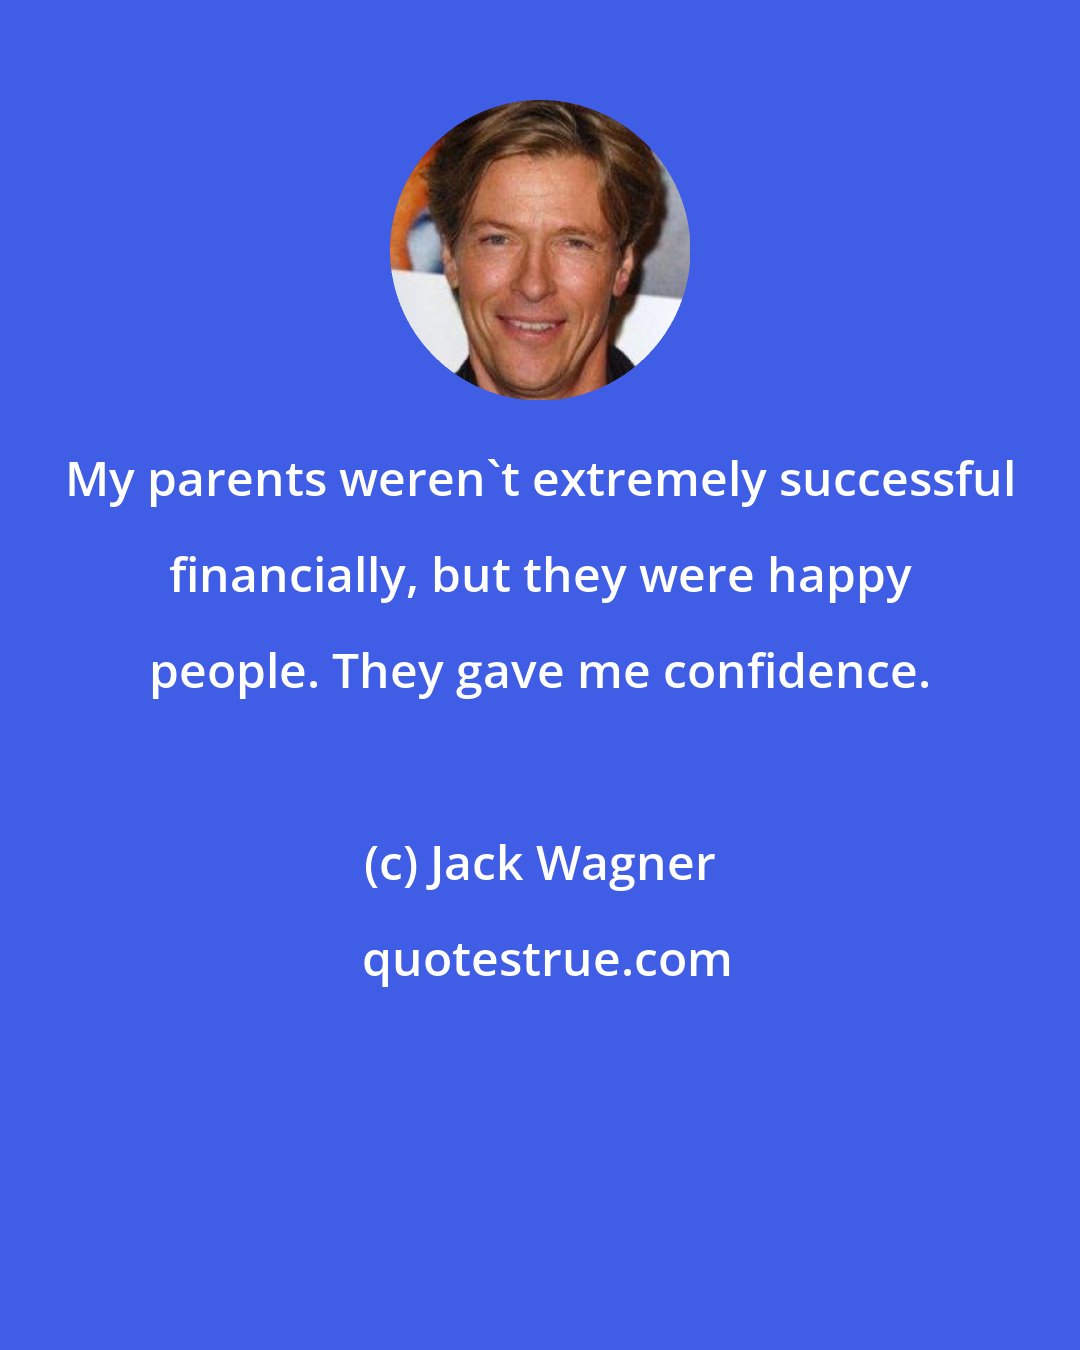 Jack Wagner: My parents weren't extremely successful financially, but they were happy people. They gave me confidence.